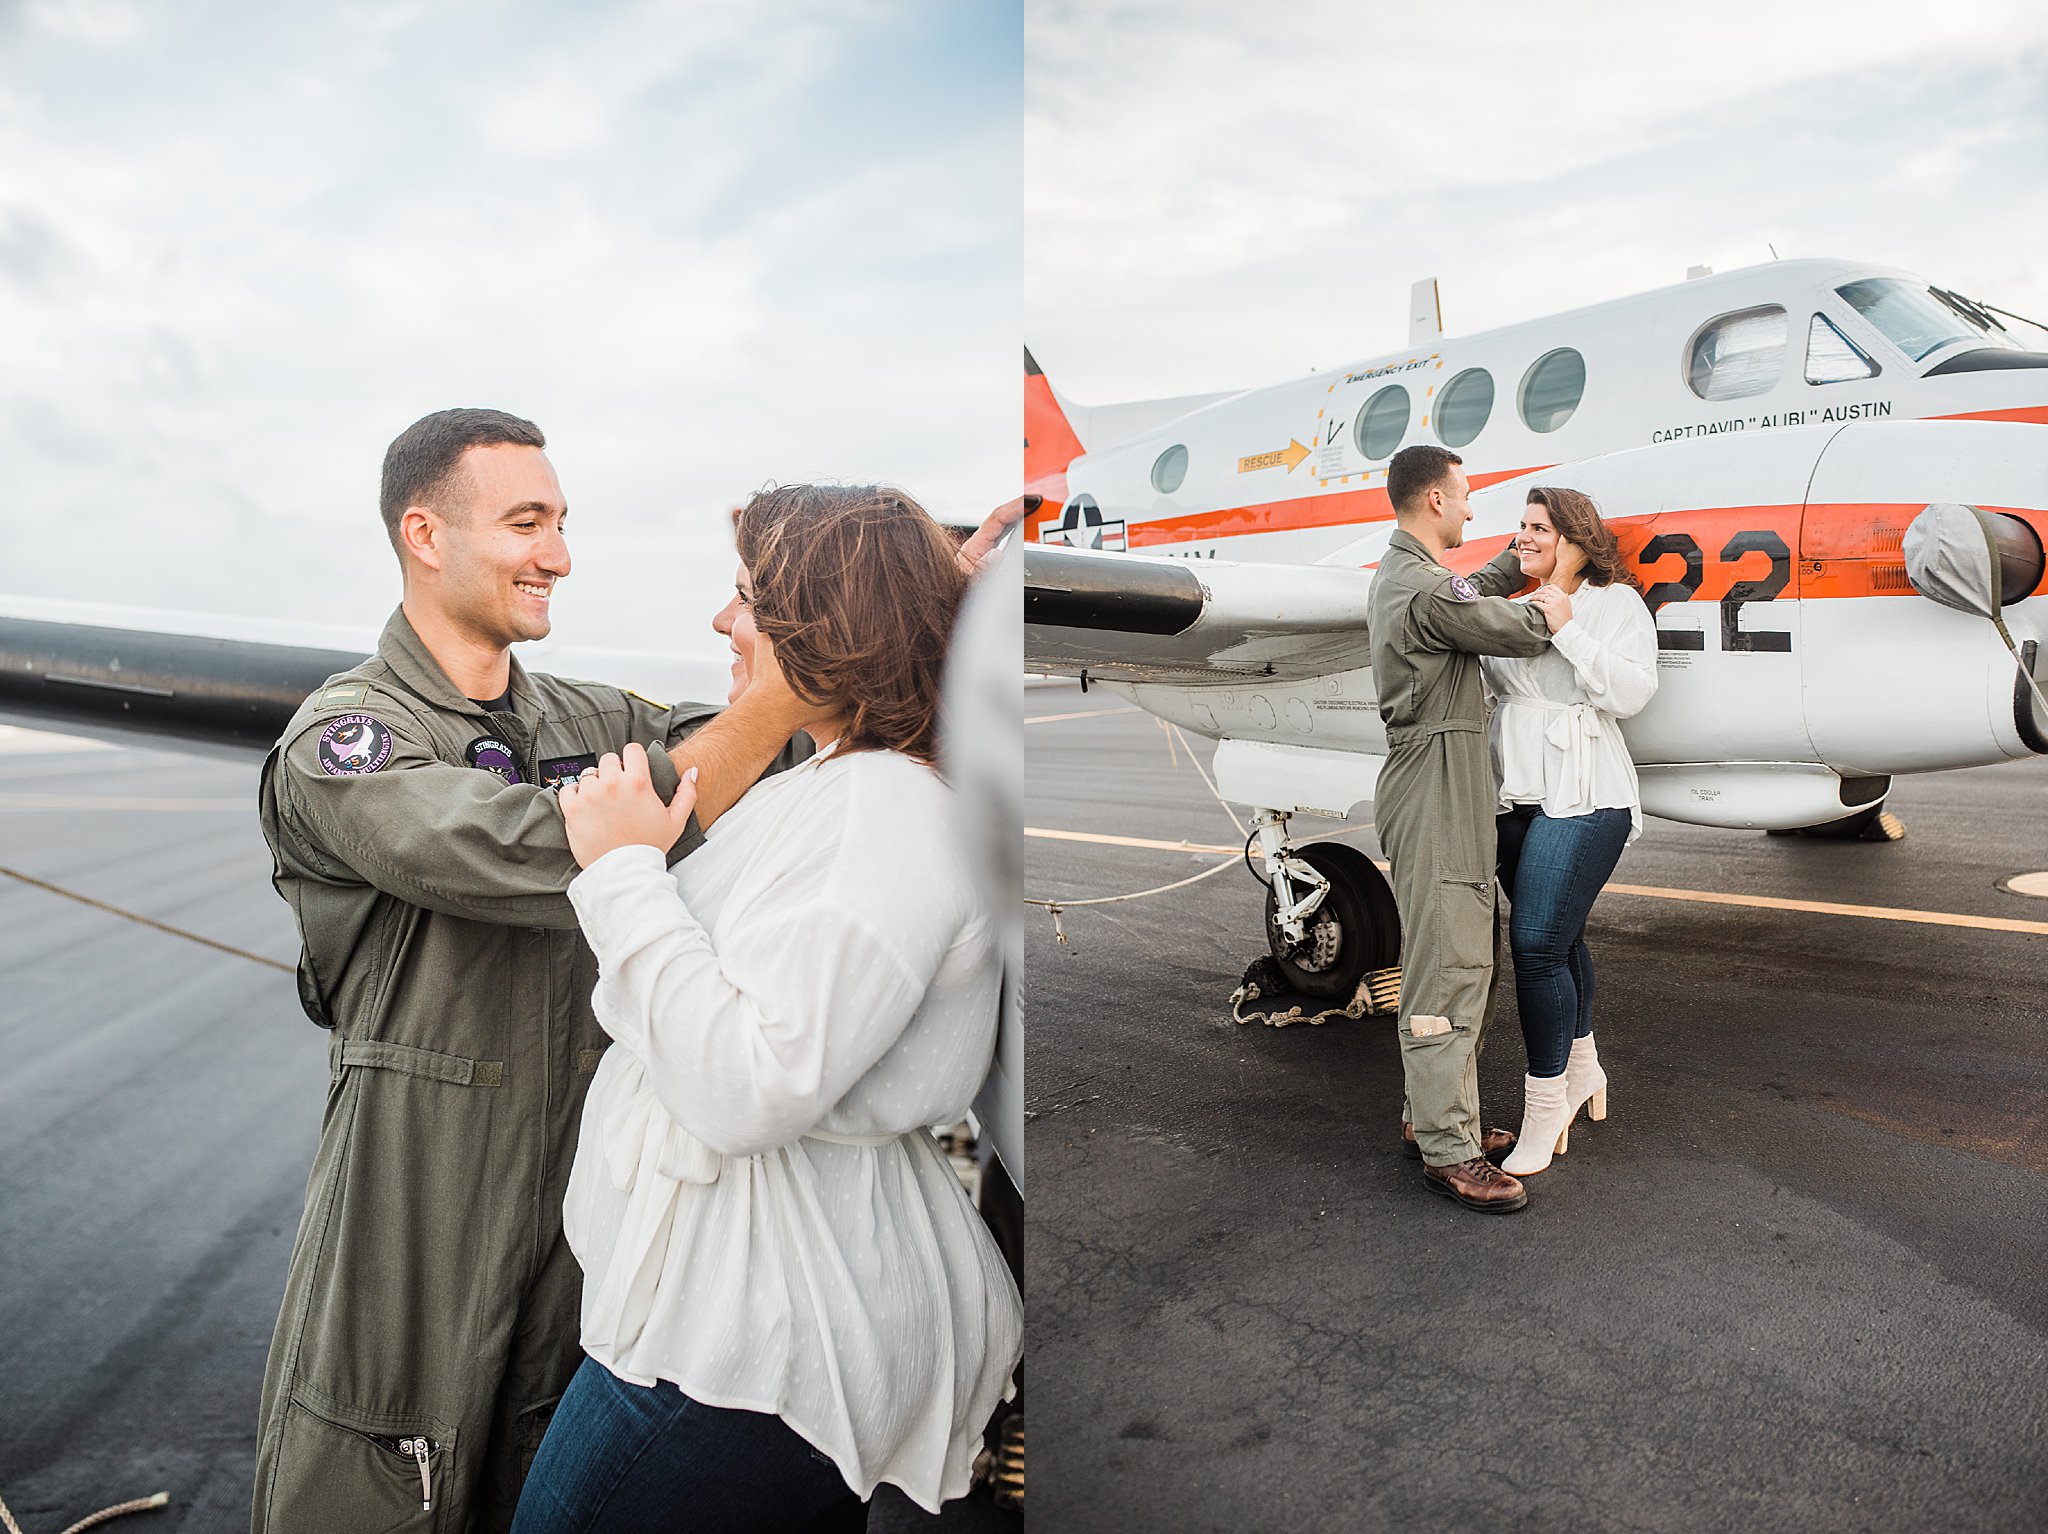 Navy Pilot in Green flight suit on flightline next to white plane with orange stripe with fiance in white top and blue jeans